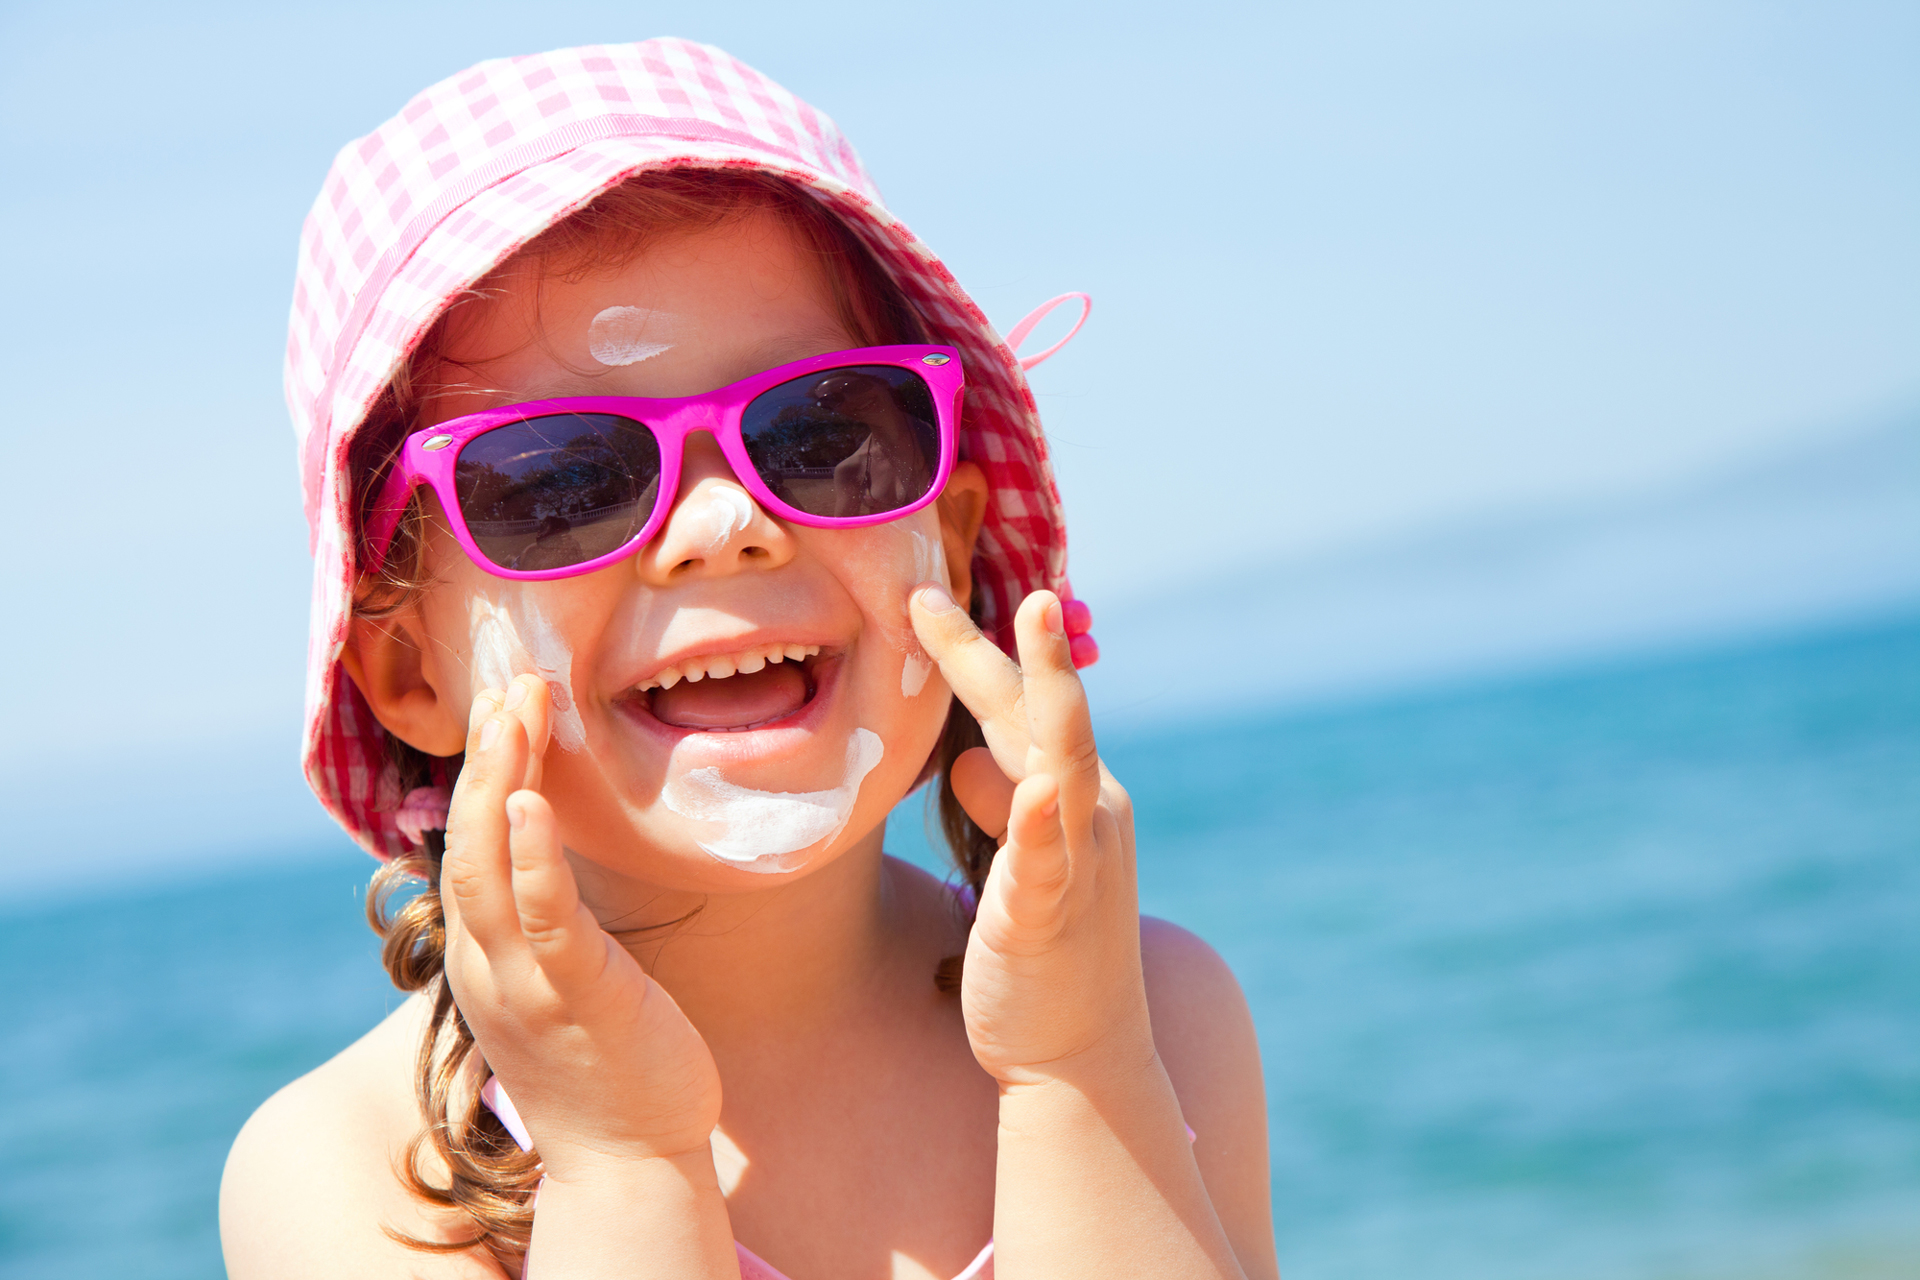 Children’s eyes are more sensitive to UV radiation, and it’s important to protect their skin and eyes from the sun. 